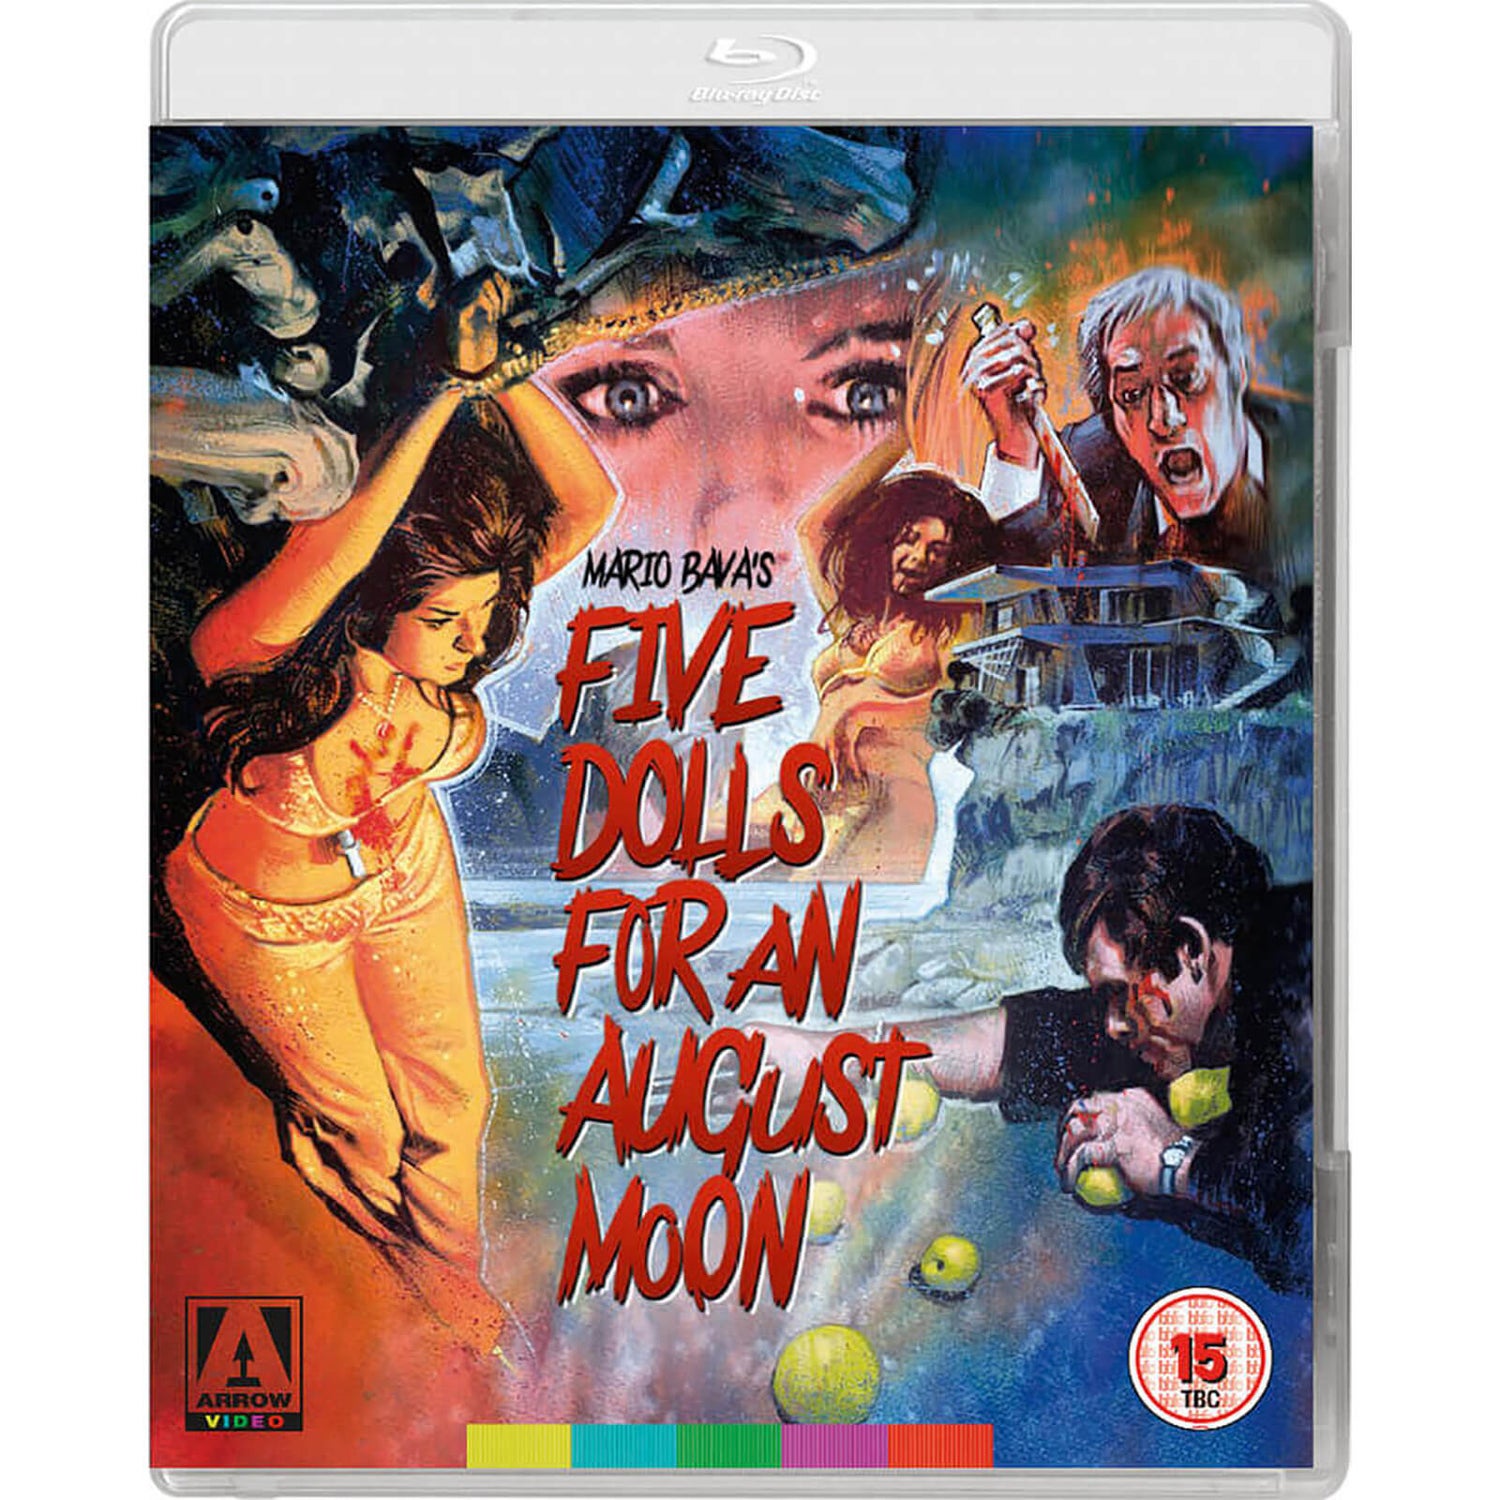 Five Dolls for an August Moon - Dual Format (Includes DVD)